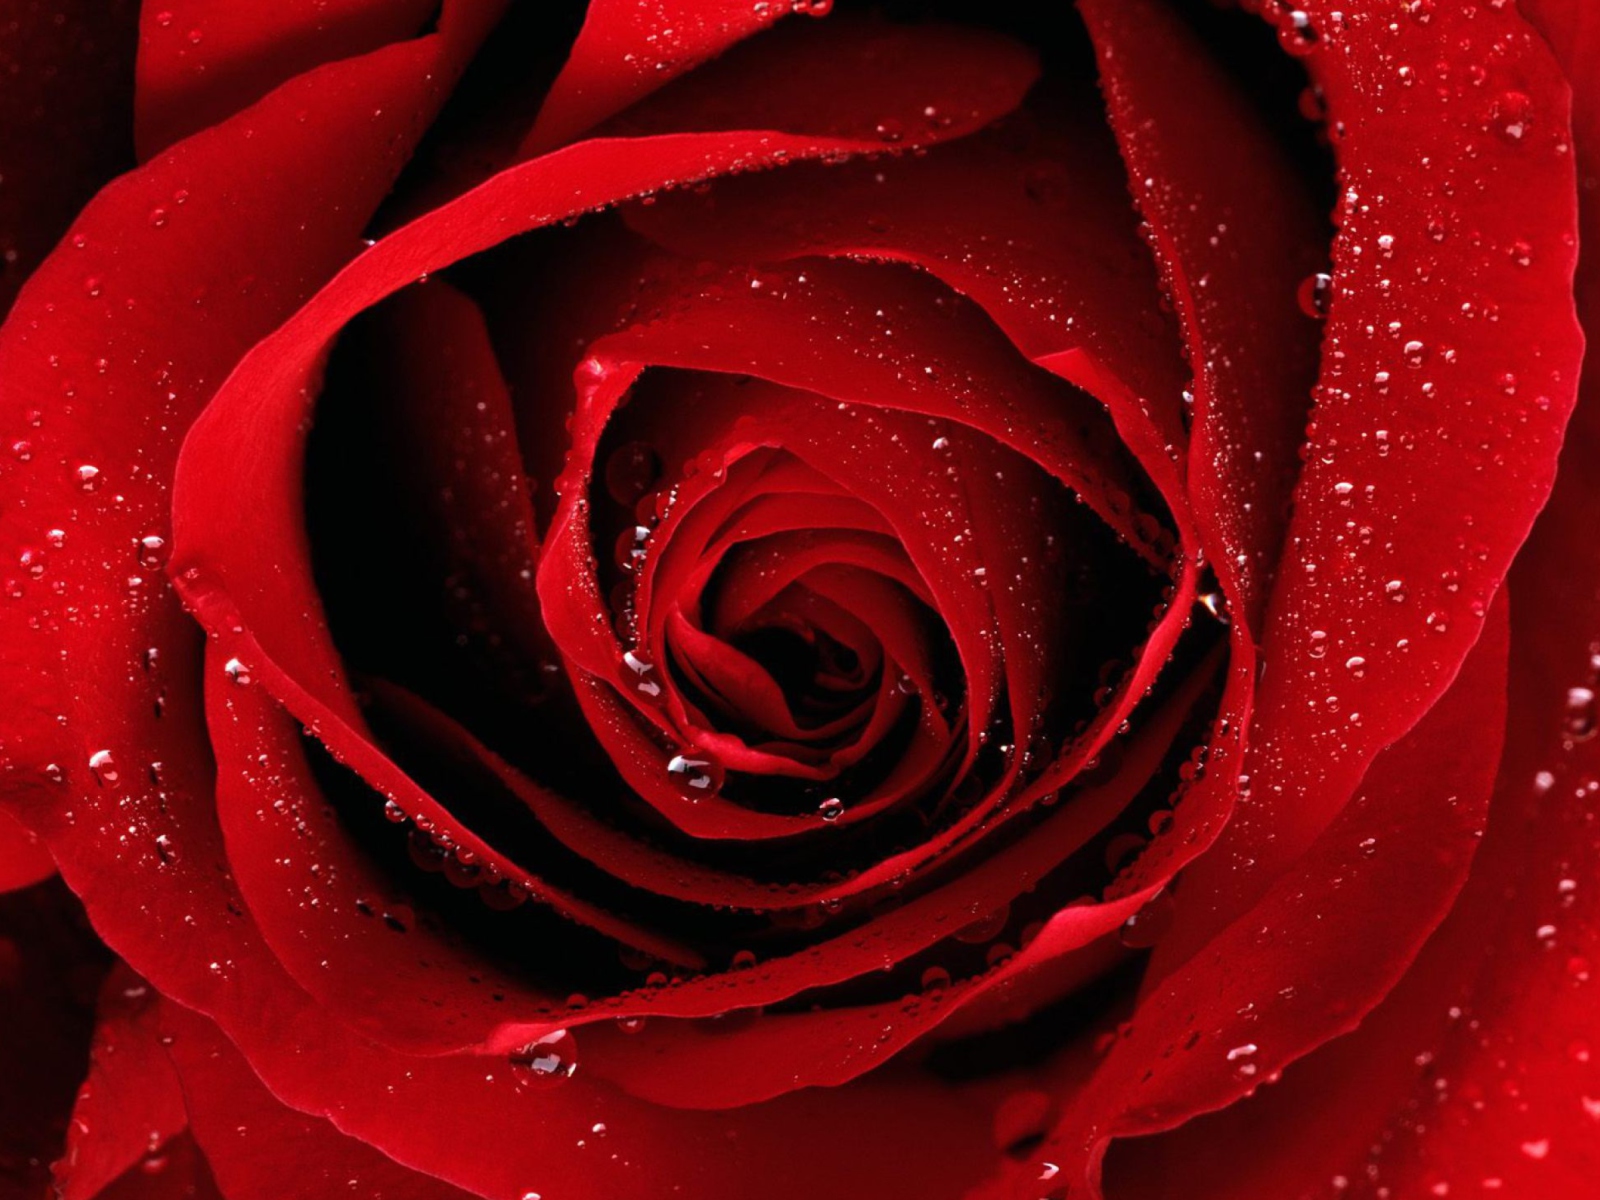 Scarlet Rose With Water Drops wallpaper 1600x1200